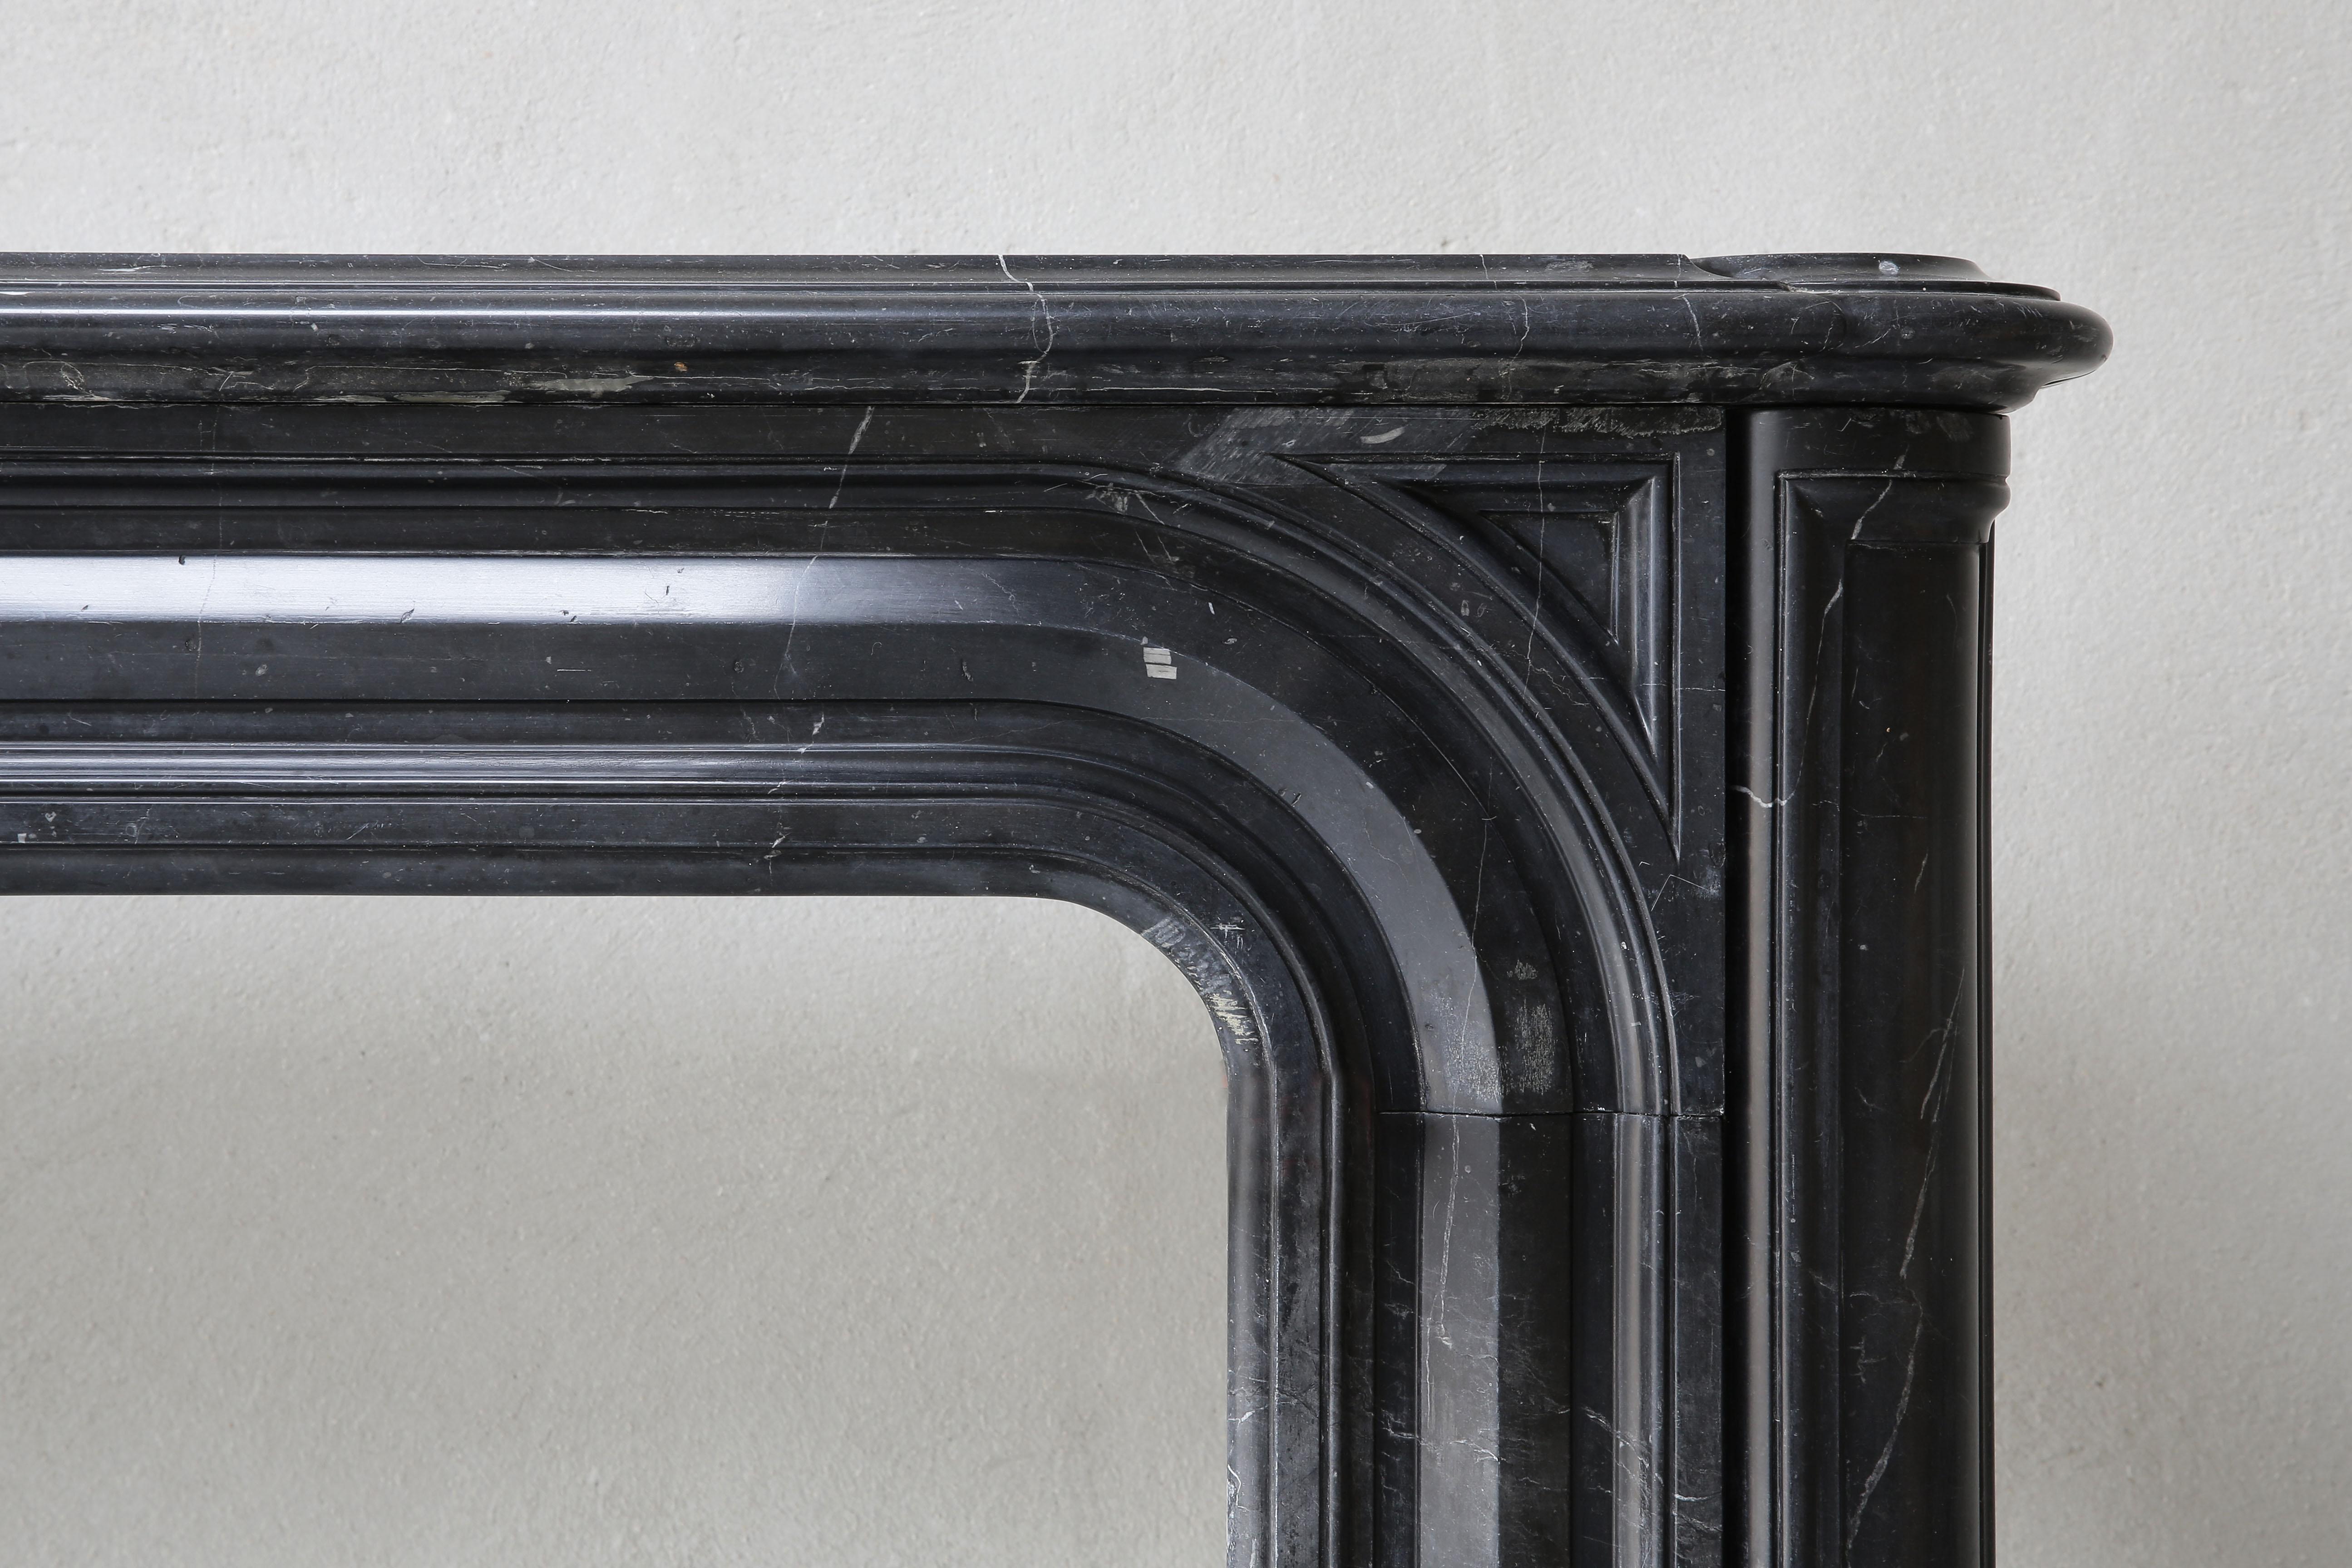 Beautiful antique marble fireplace from Nero Marquina marble. This type of marble comes from the North of Spain. In this marble type you see white veins, in contrast to Noir de Mazy marble that is uniformly black in color. This mantelpiece dates